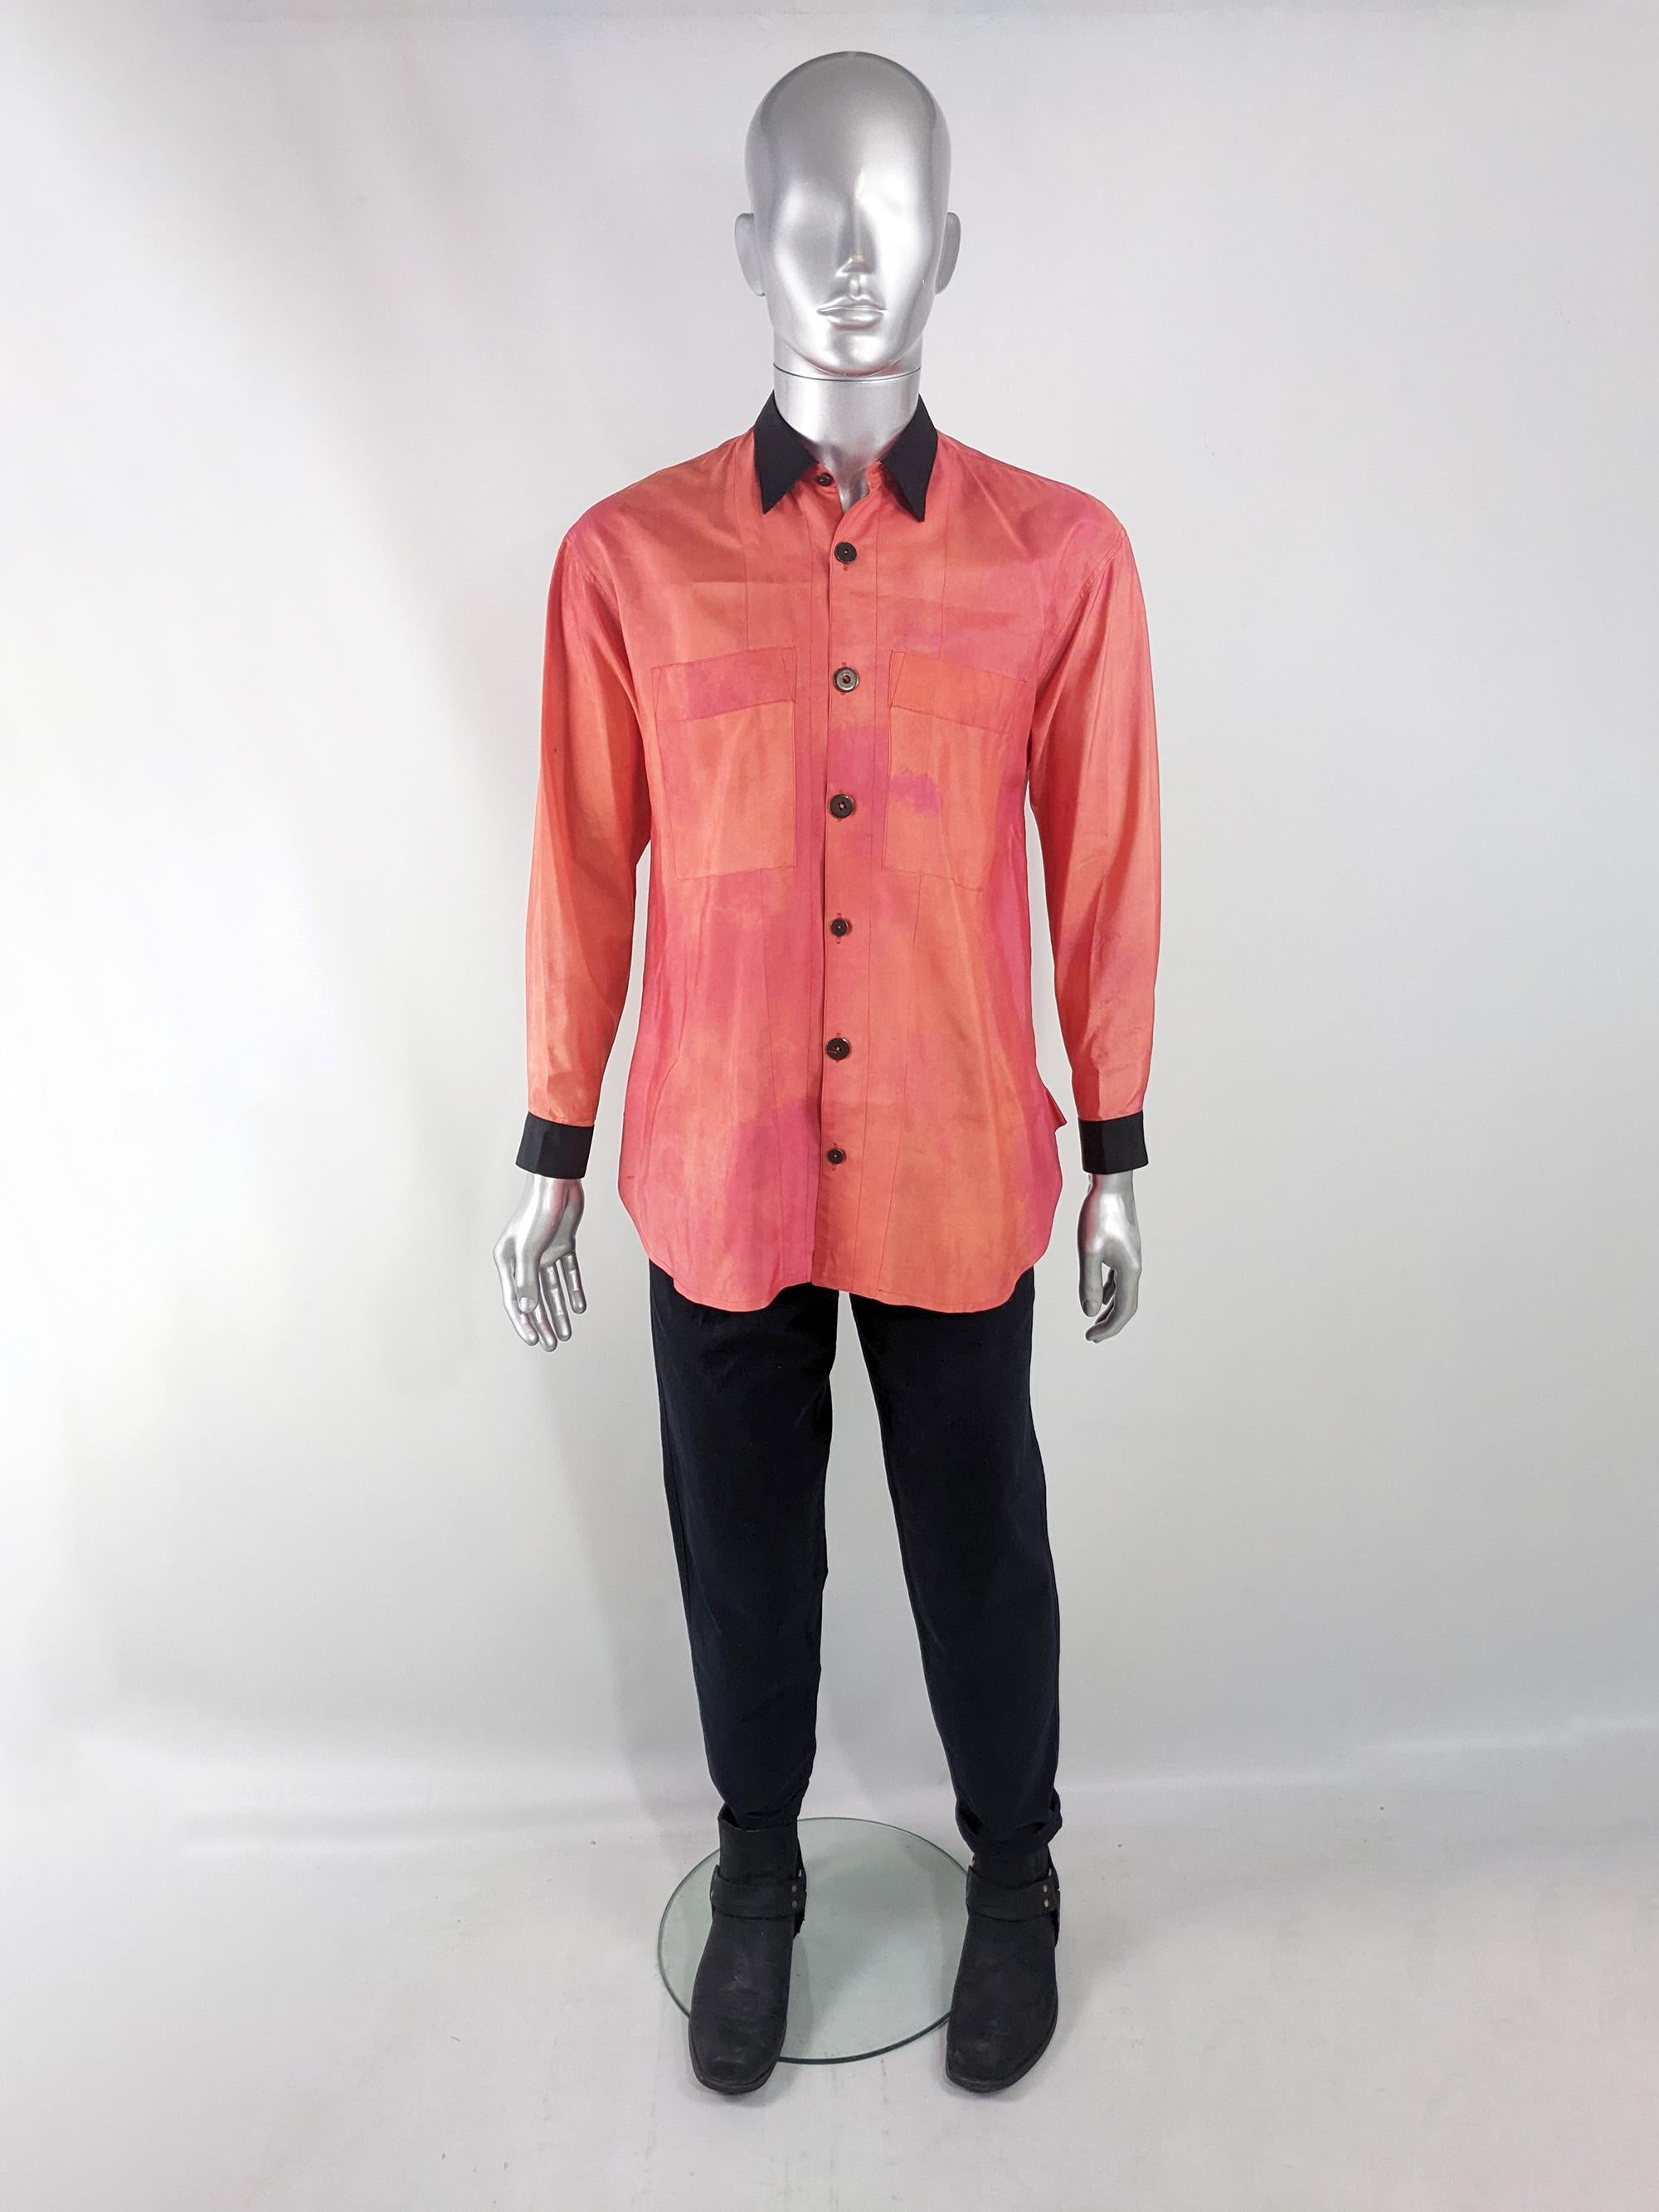 An incredible and rare vintage shirt from the 80s by cult British fashion label, Workers for Freedom - a label by duo Graham Fraser and Richard Nott who were awarded the Designer of the Year in 1989 at the BFA for their label. Their clients included